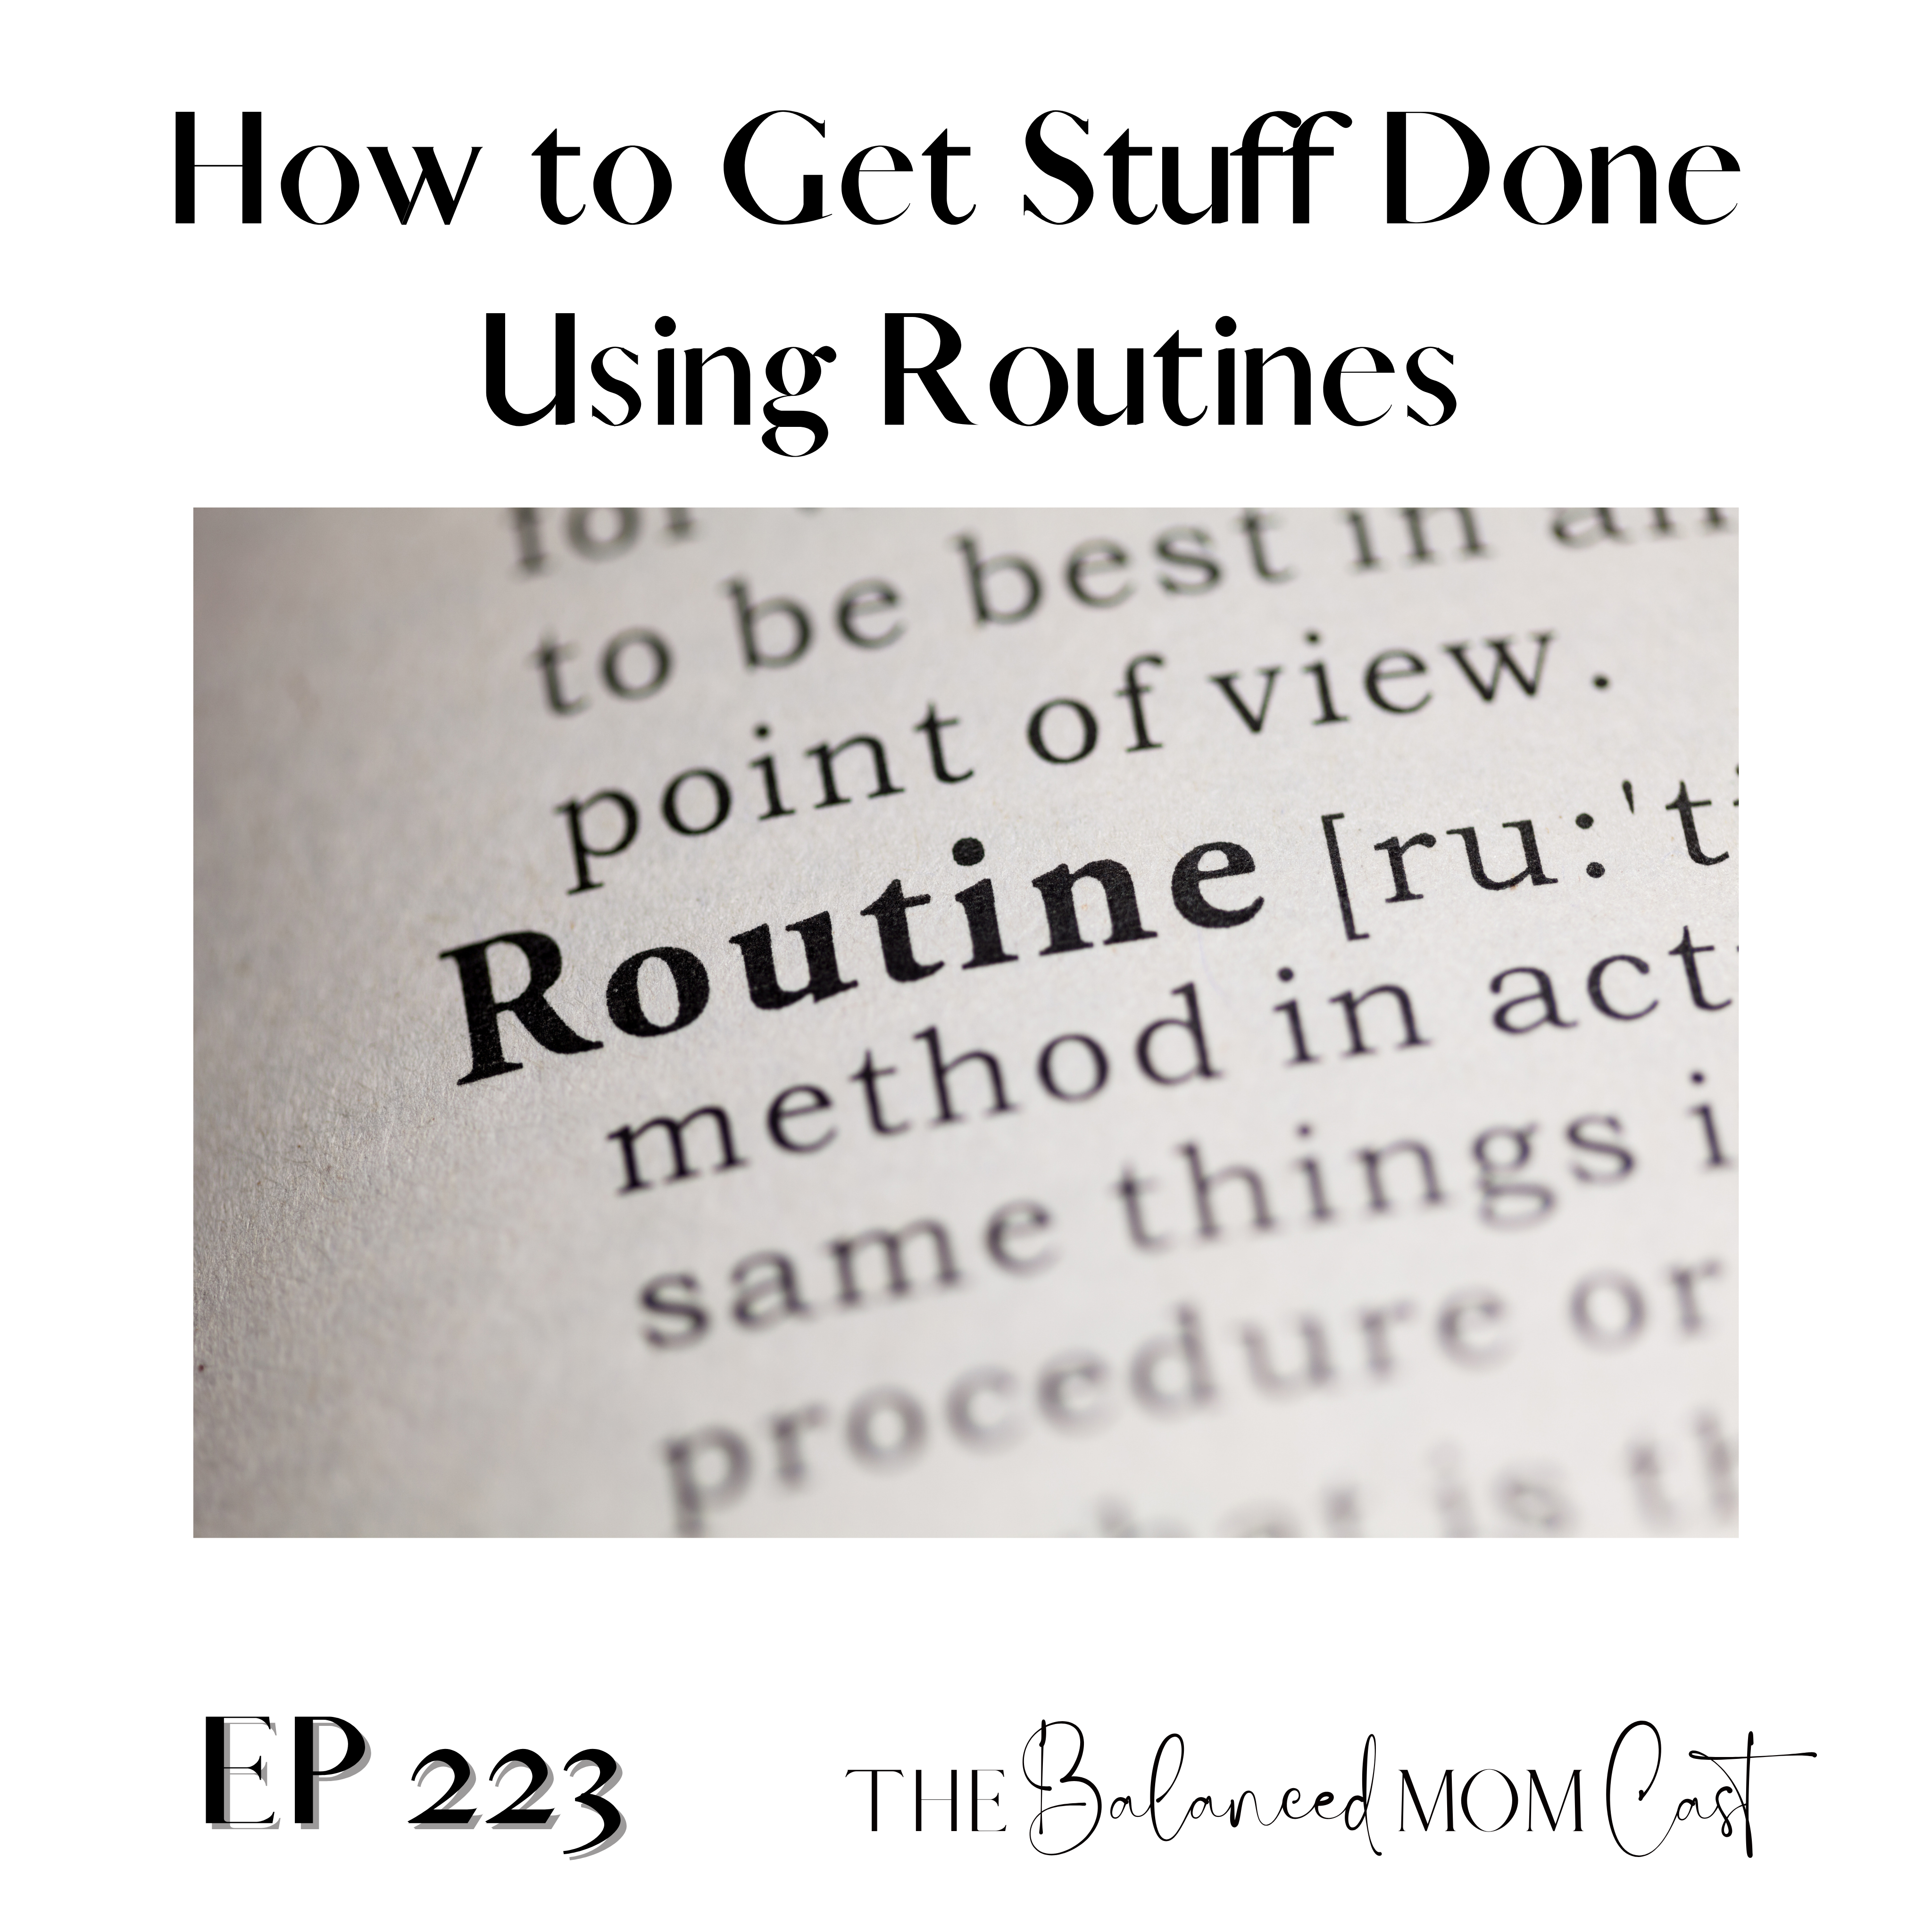 Ep 223: How to Get Stuff Done Using Routines